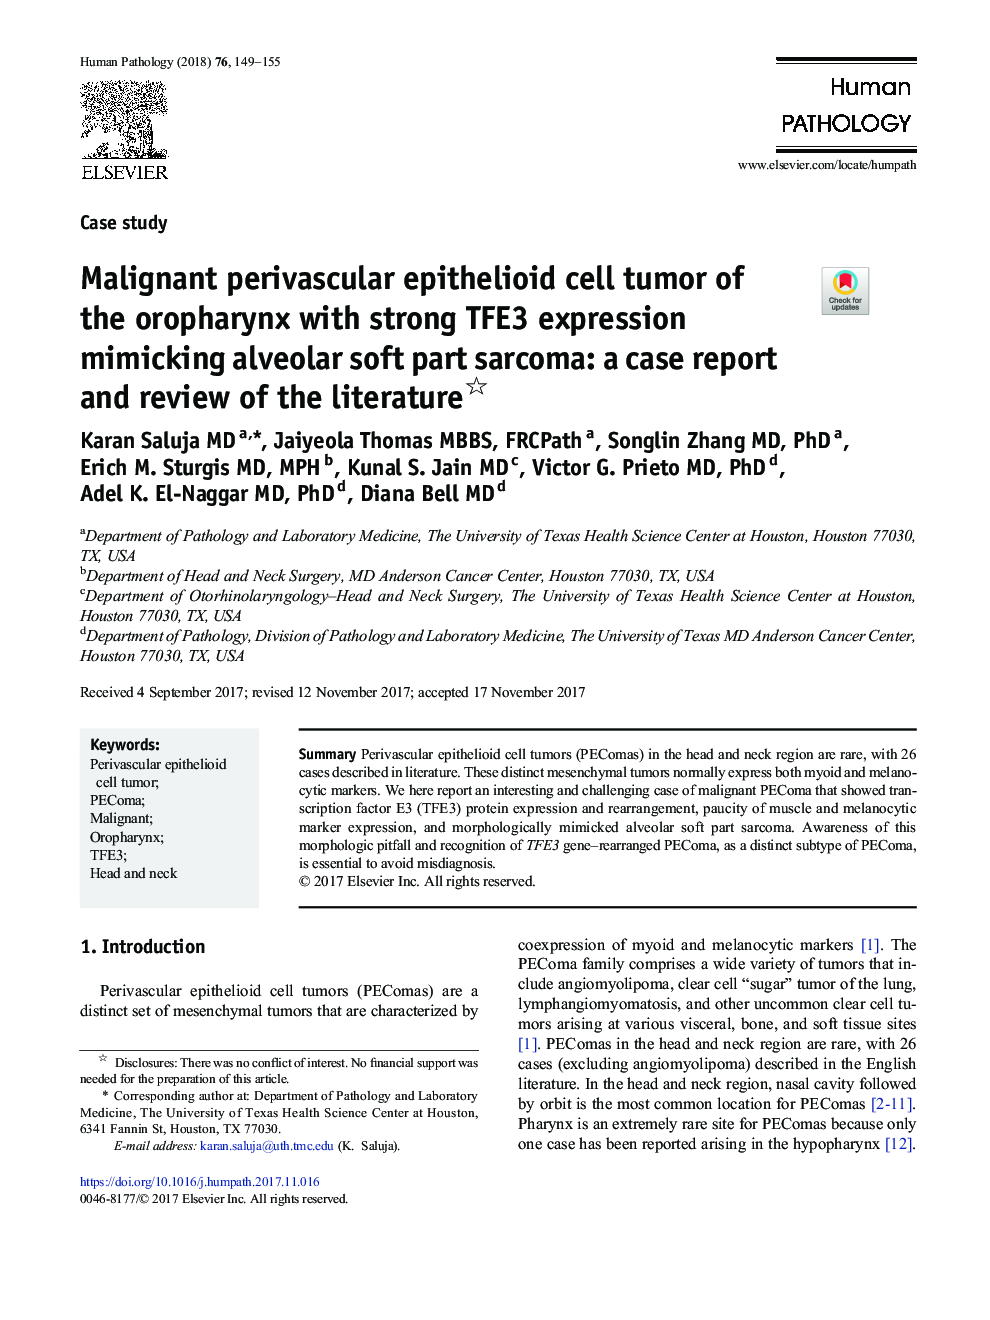 Malignant perivascular epithelioid cell tumor of the oropharynx with strong TFE3 expression mimicking alveolar soft part sarcoma: a case report and review of the literature